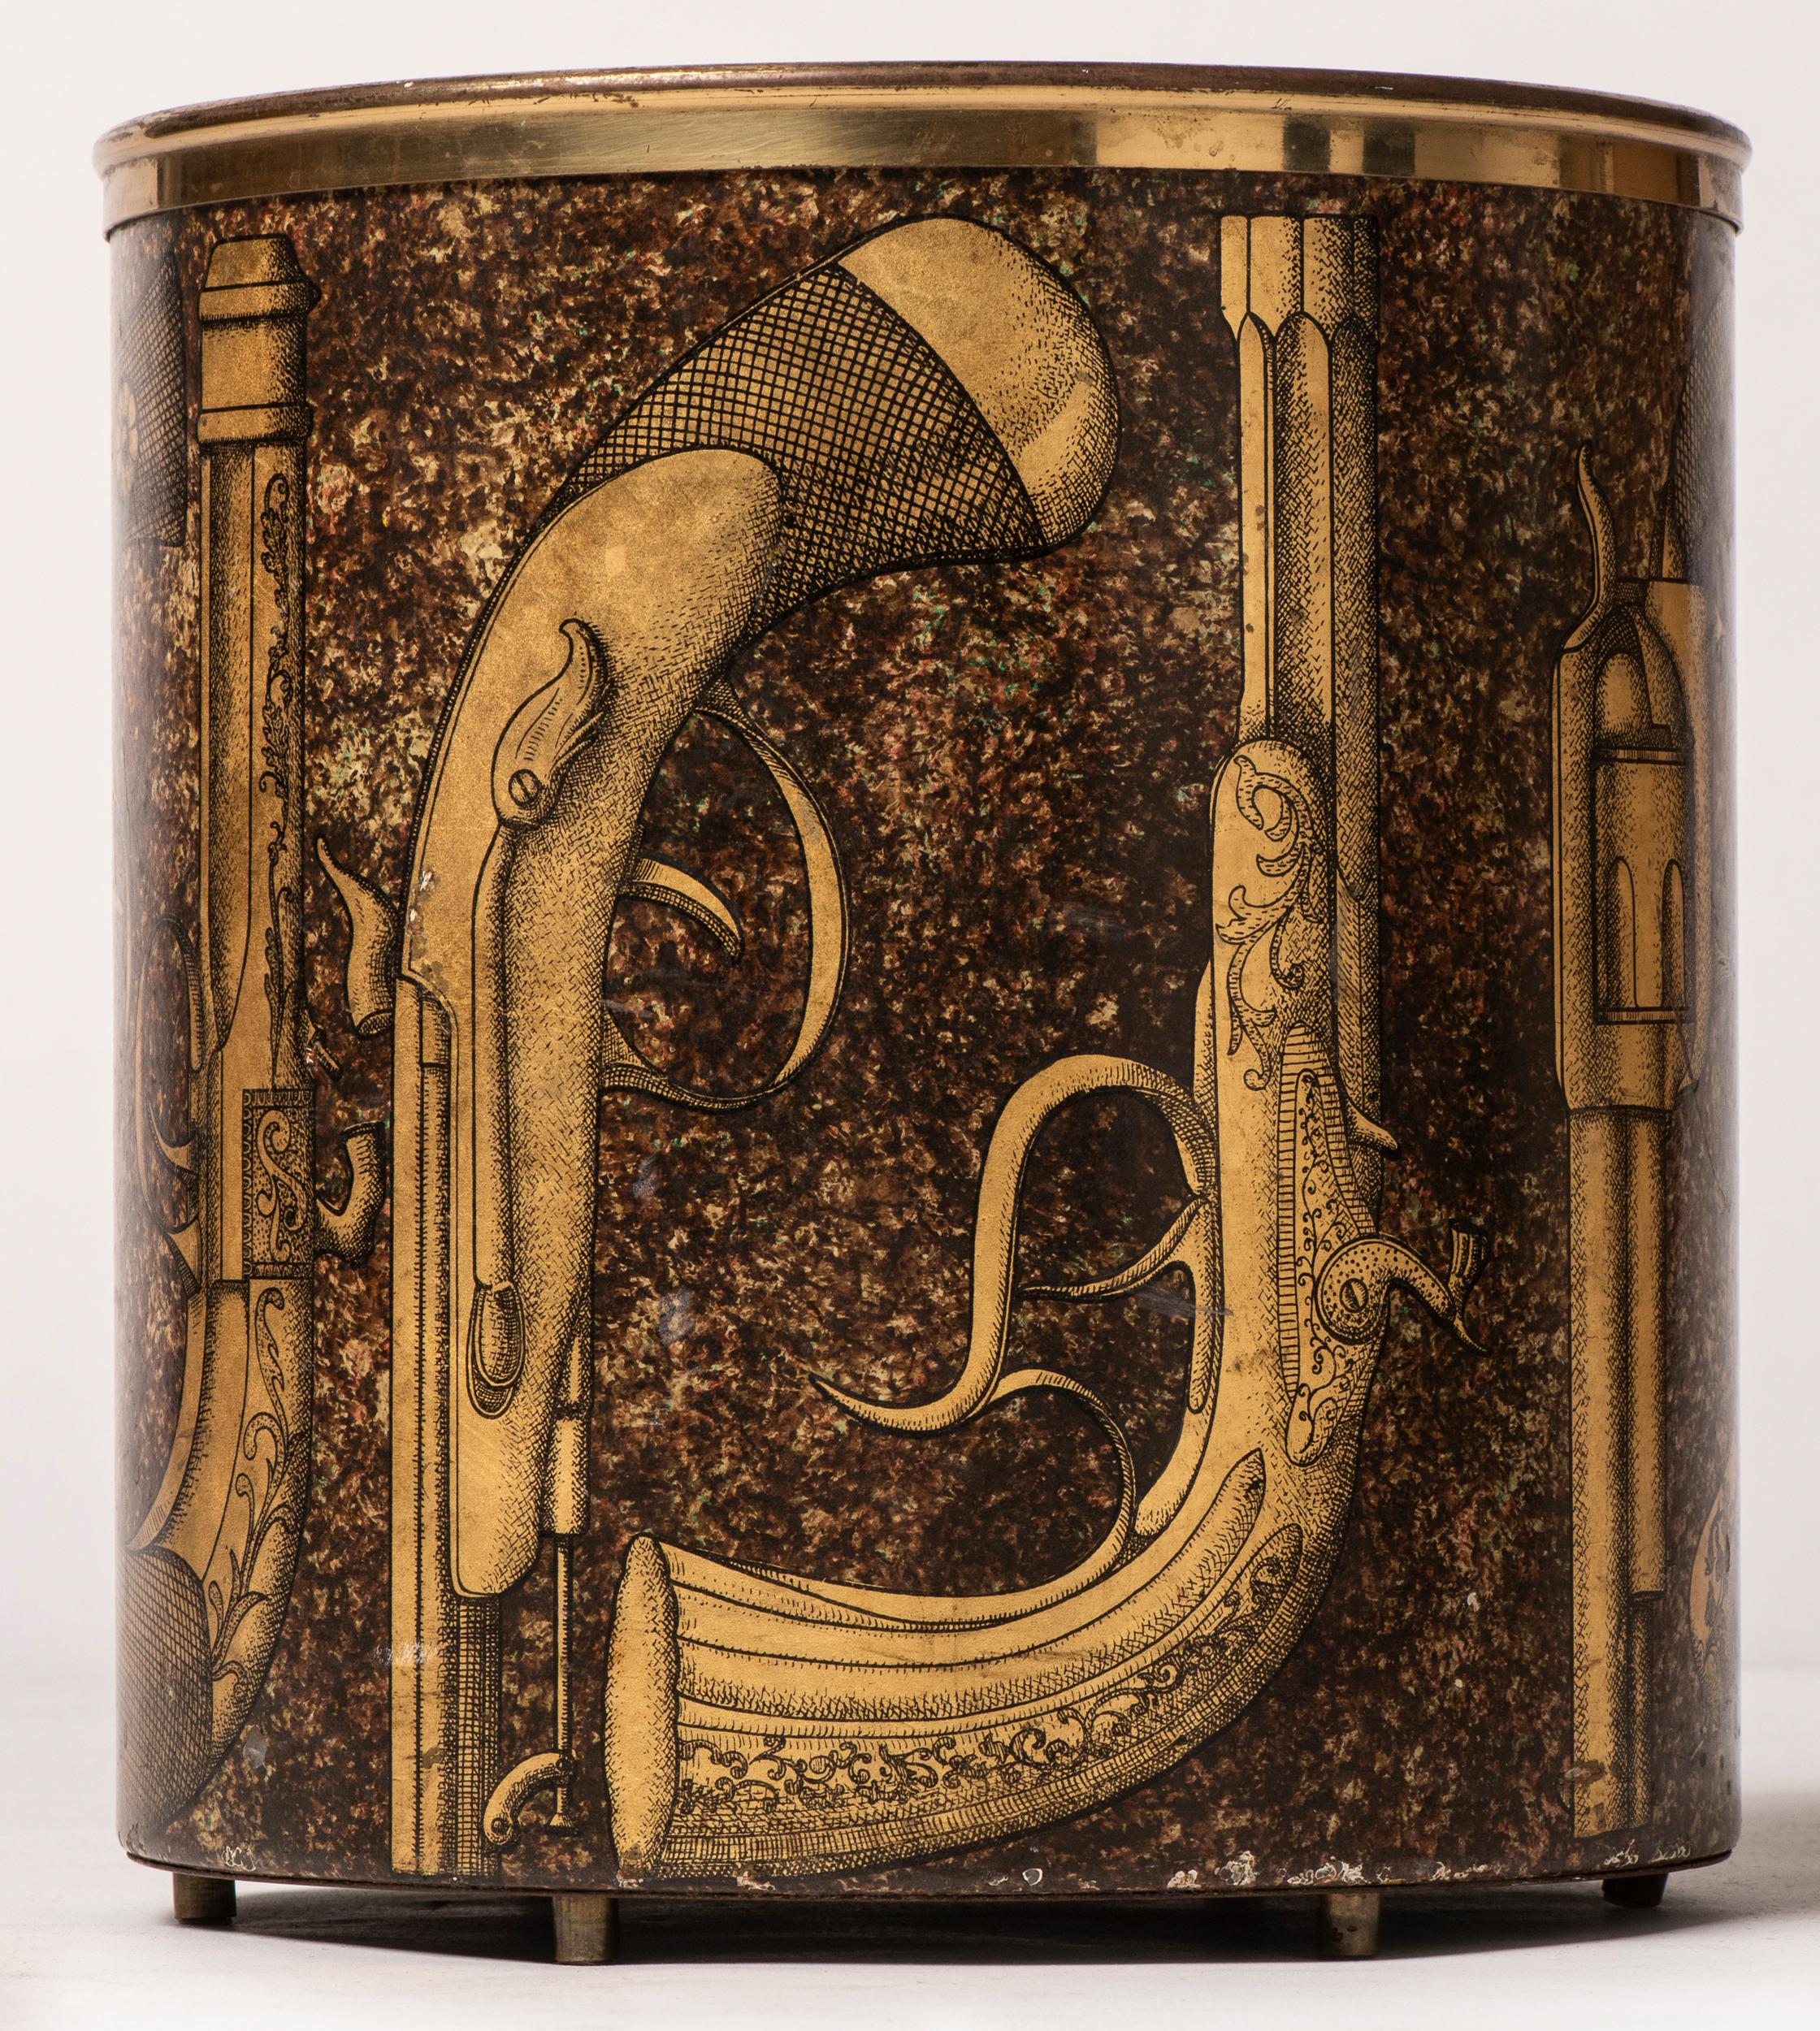 Piero Fornasetti waste paper bin.
“Pistole”
Metal lithographically printed and hand colored.
Mark to base.
Italy, circa 1960.
Measures: 28 cm height x 26 cm diameter.
 